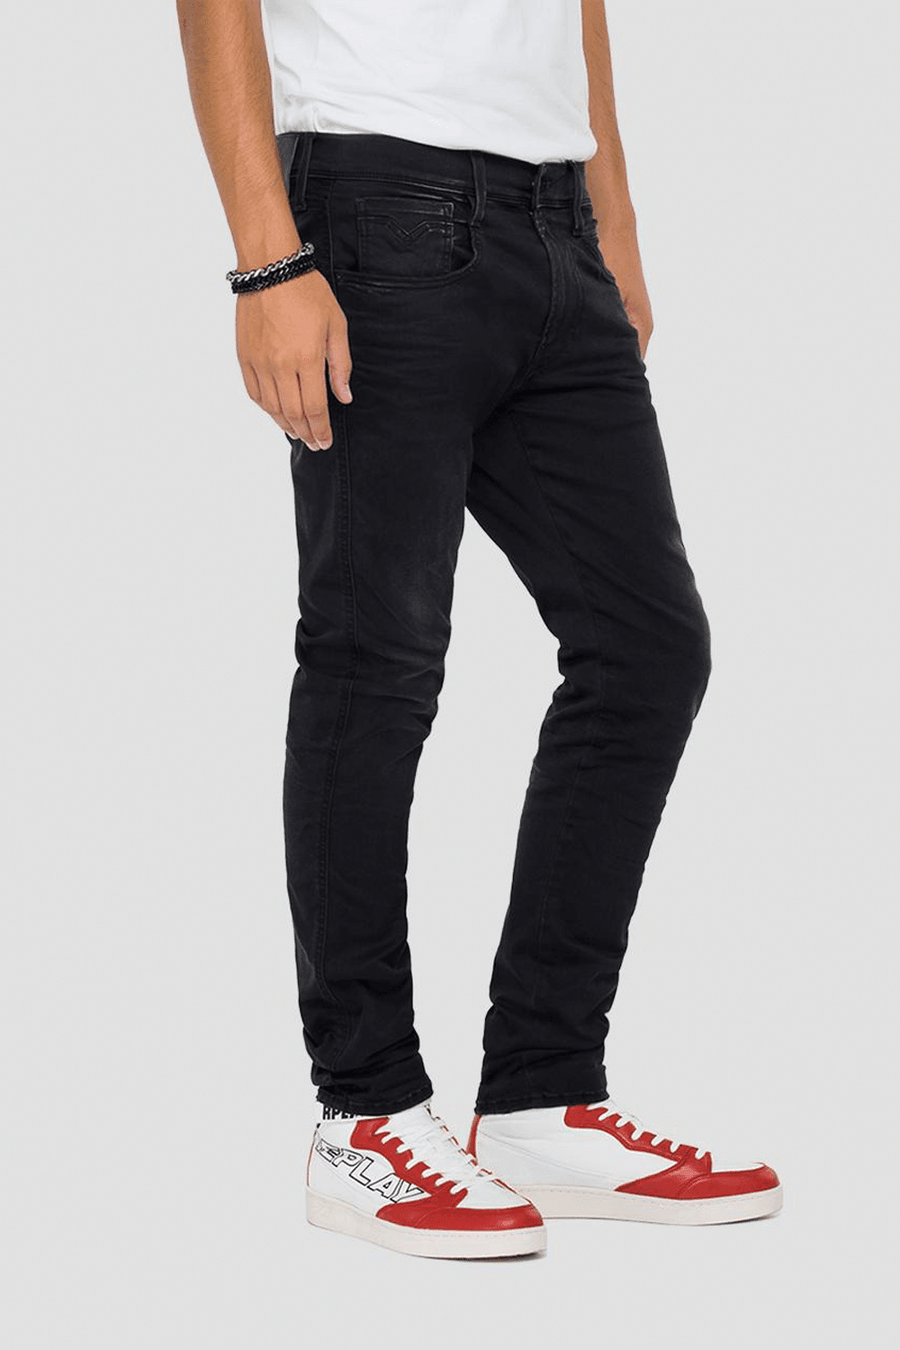 Buy the Replay Hyperflex X-Lite Anbass Jean in Washed Black at Intro. Spend £50 for free UK delivery. Official stockists. We ship worldwide.